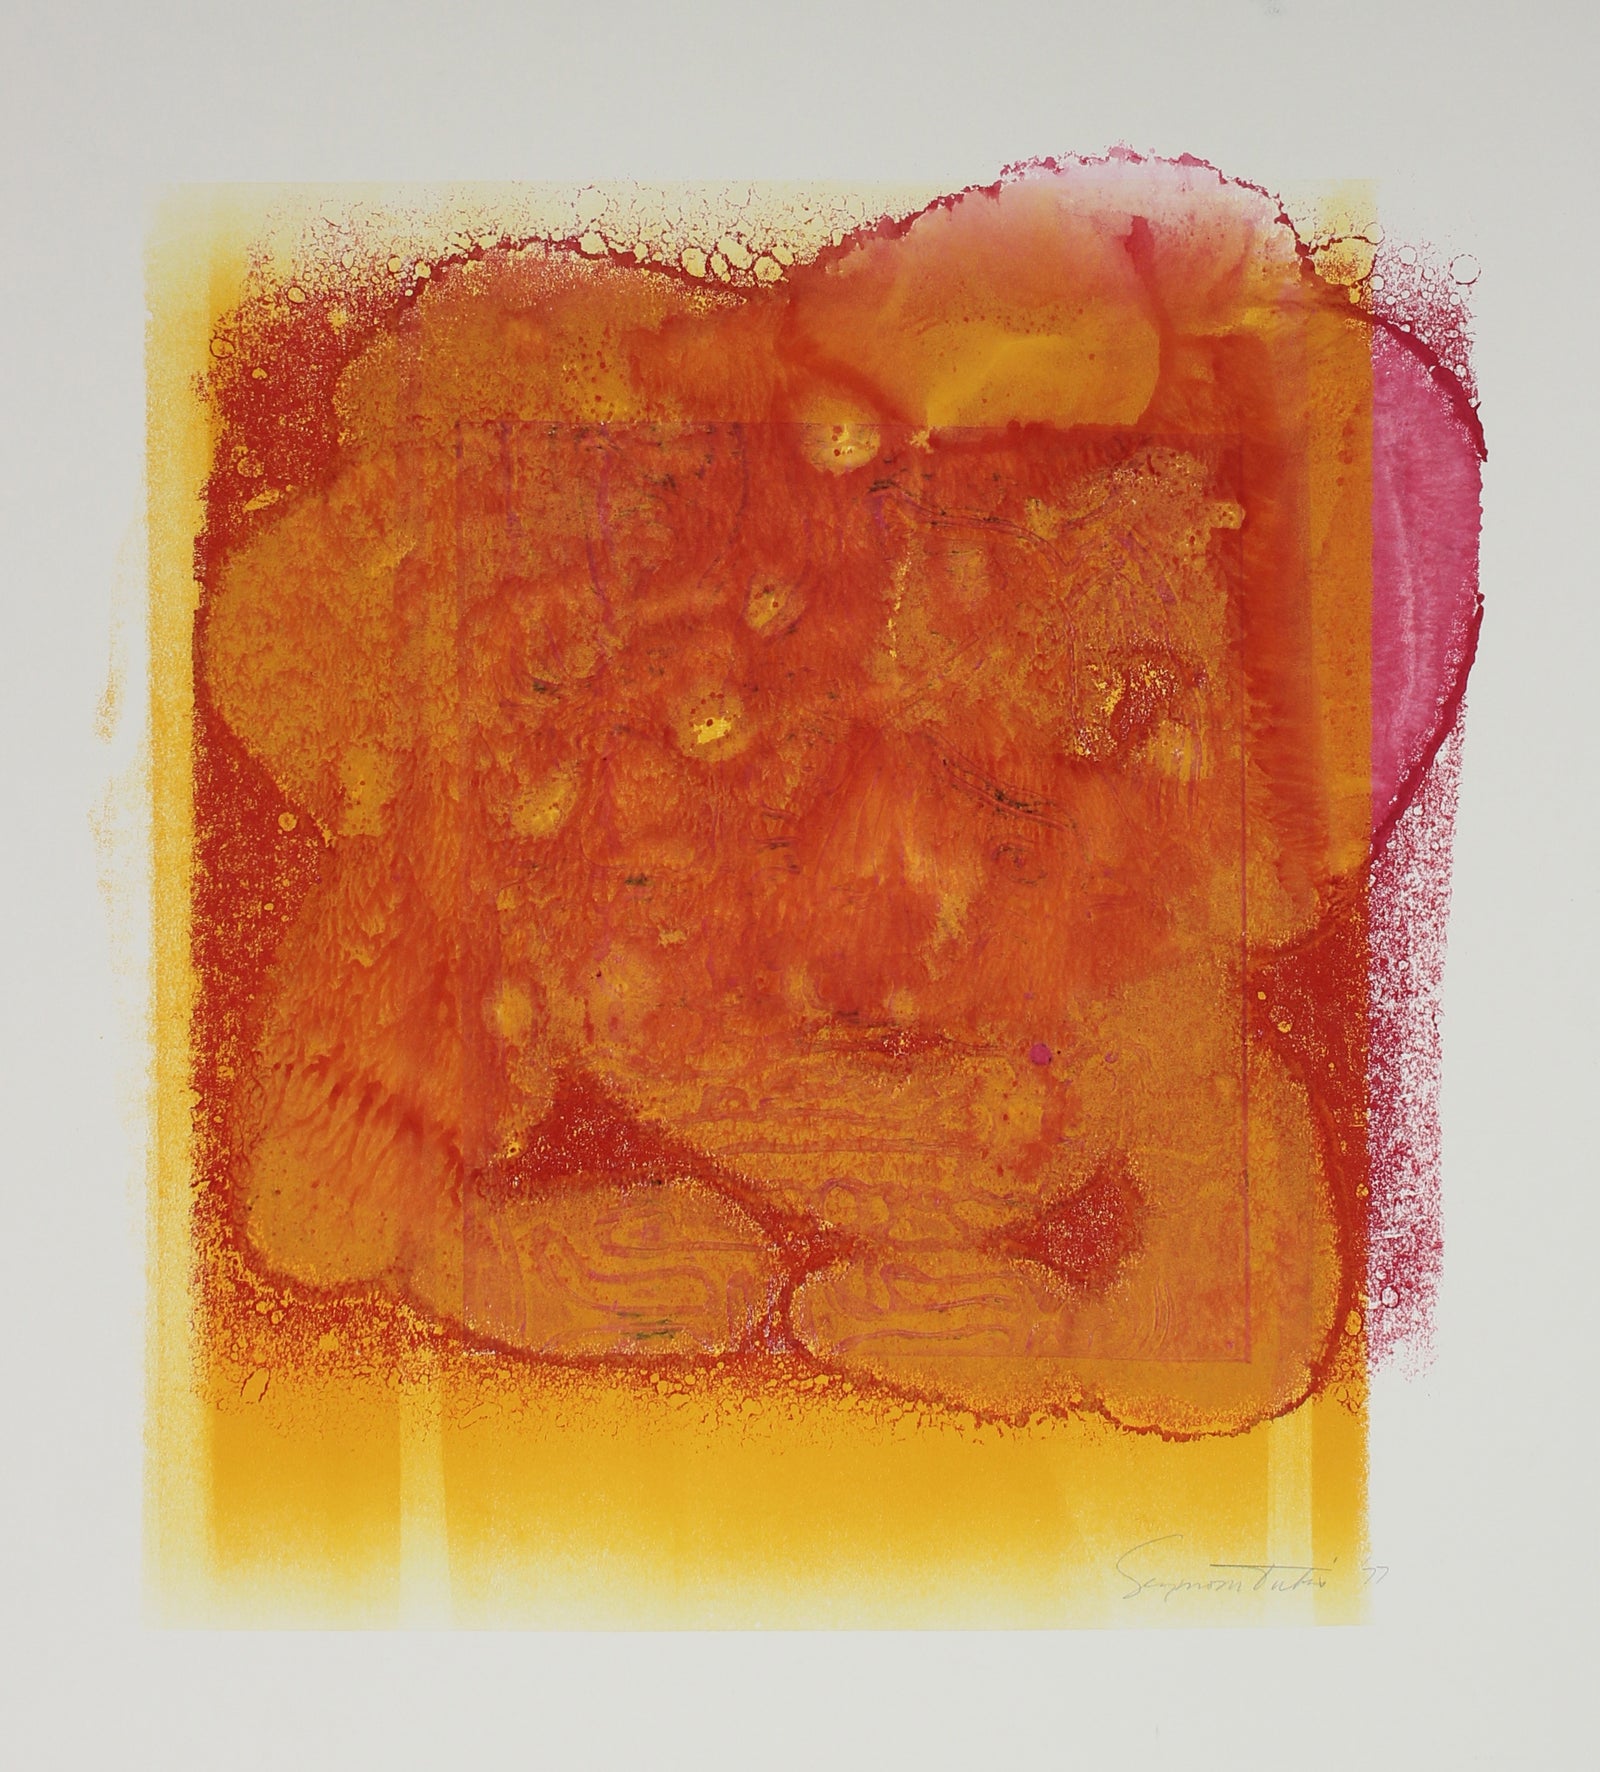 Red & Yellow Rothko-Esque Abstract <br>1977 Monotype on Paper <br><br>#61740